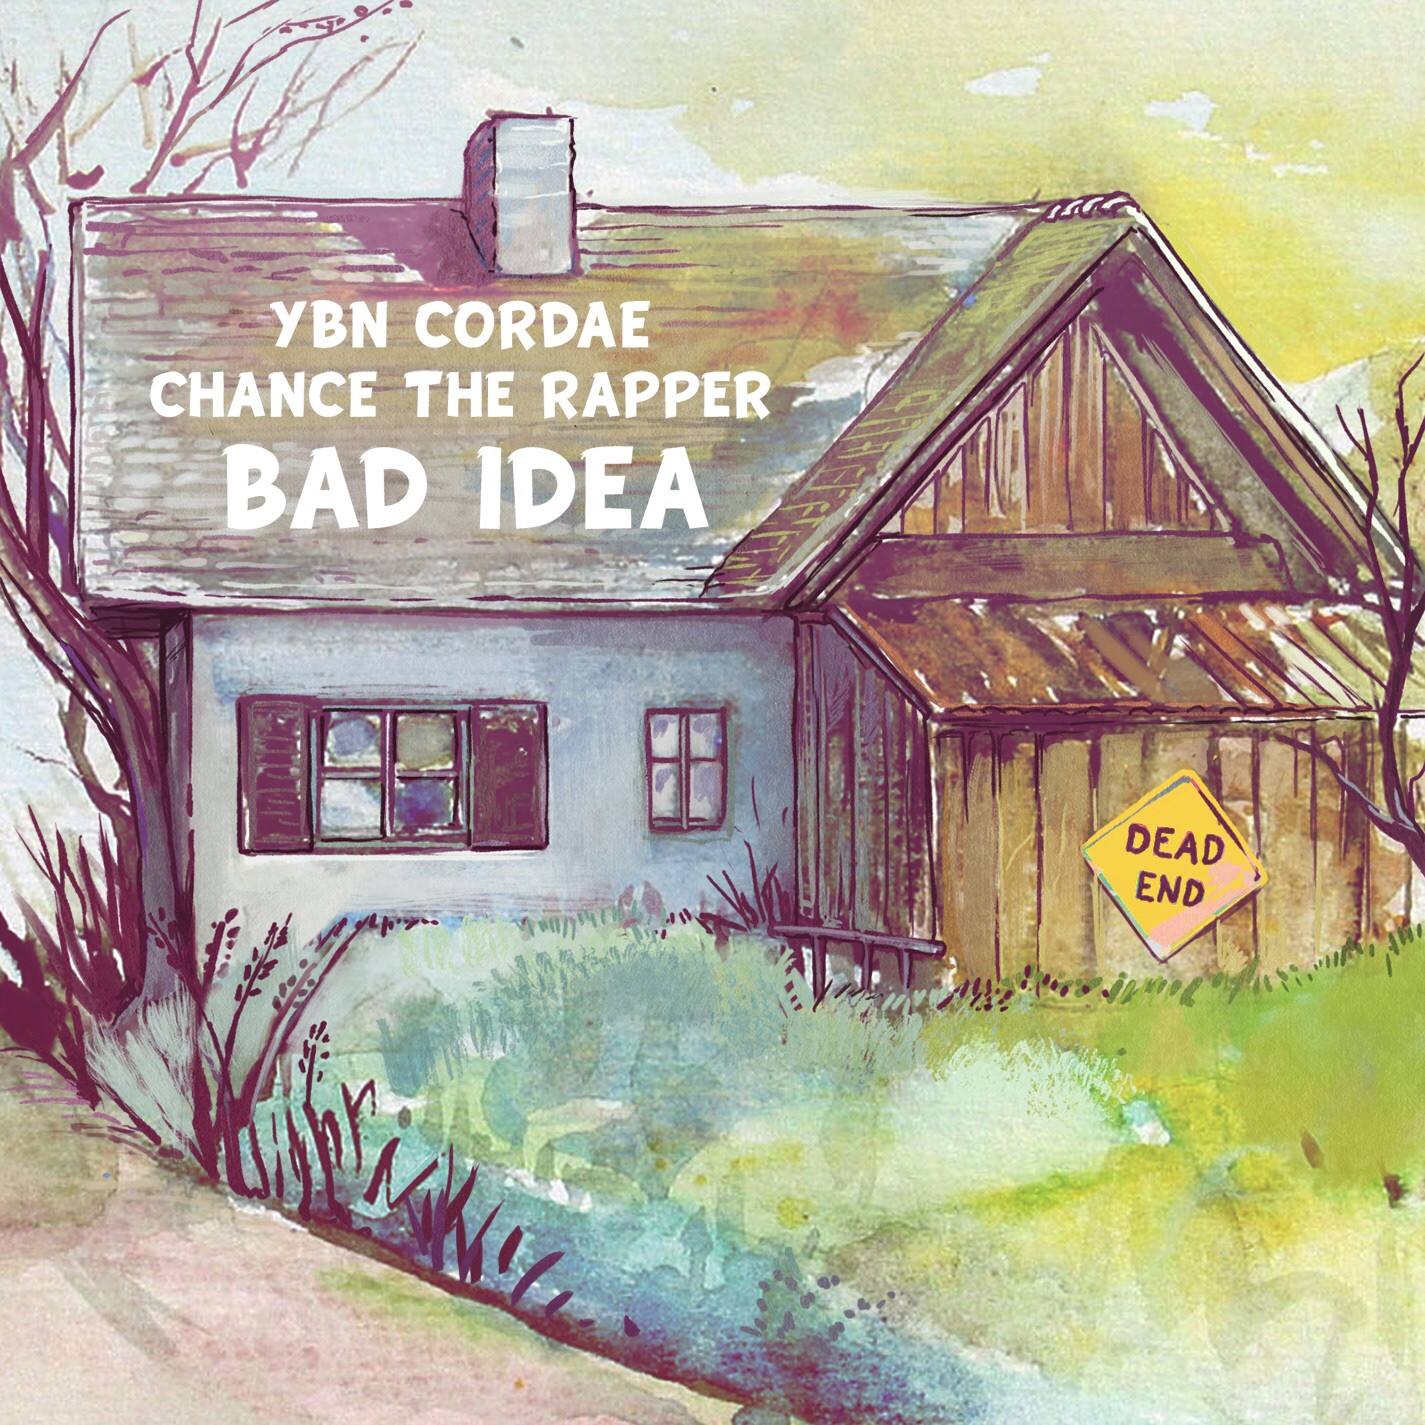 YBN Cordae & Chance The Rapper Link Up For “Bad Idea”